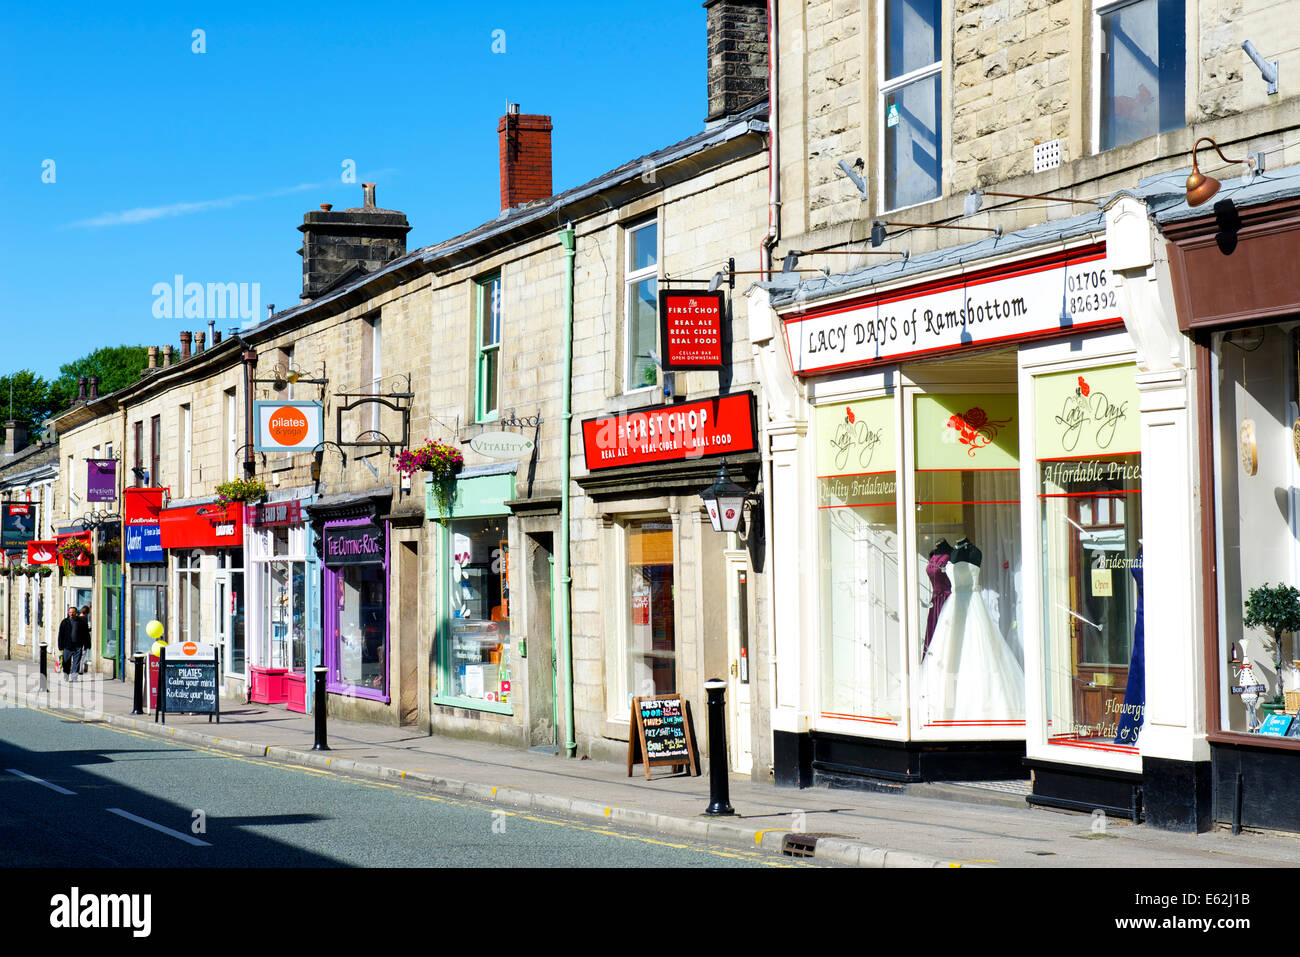 Street in Ramsbottom, Greater Manchester, England UK Stock Photo